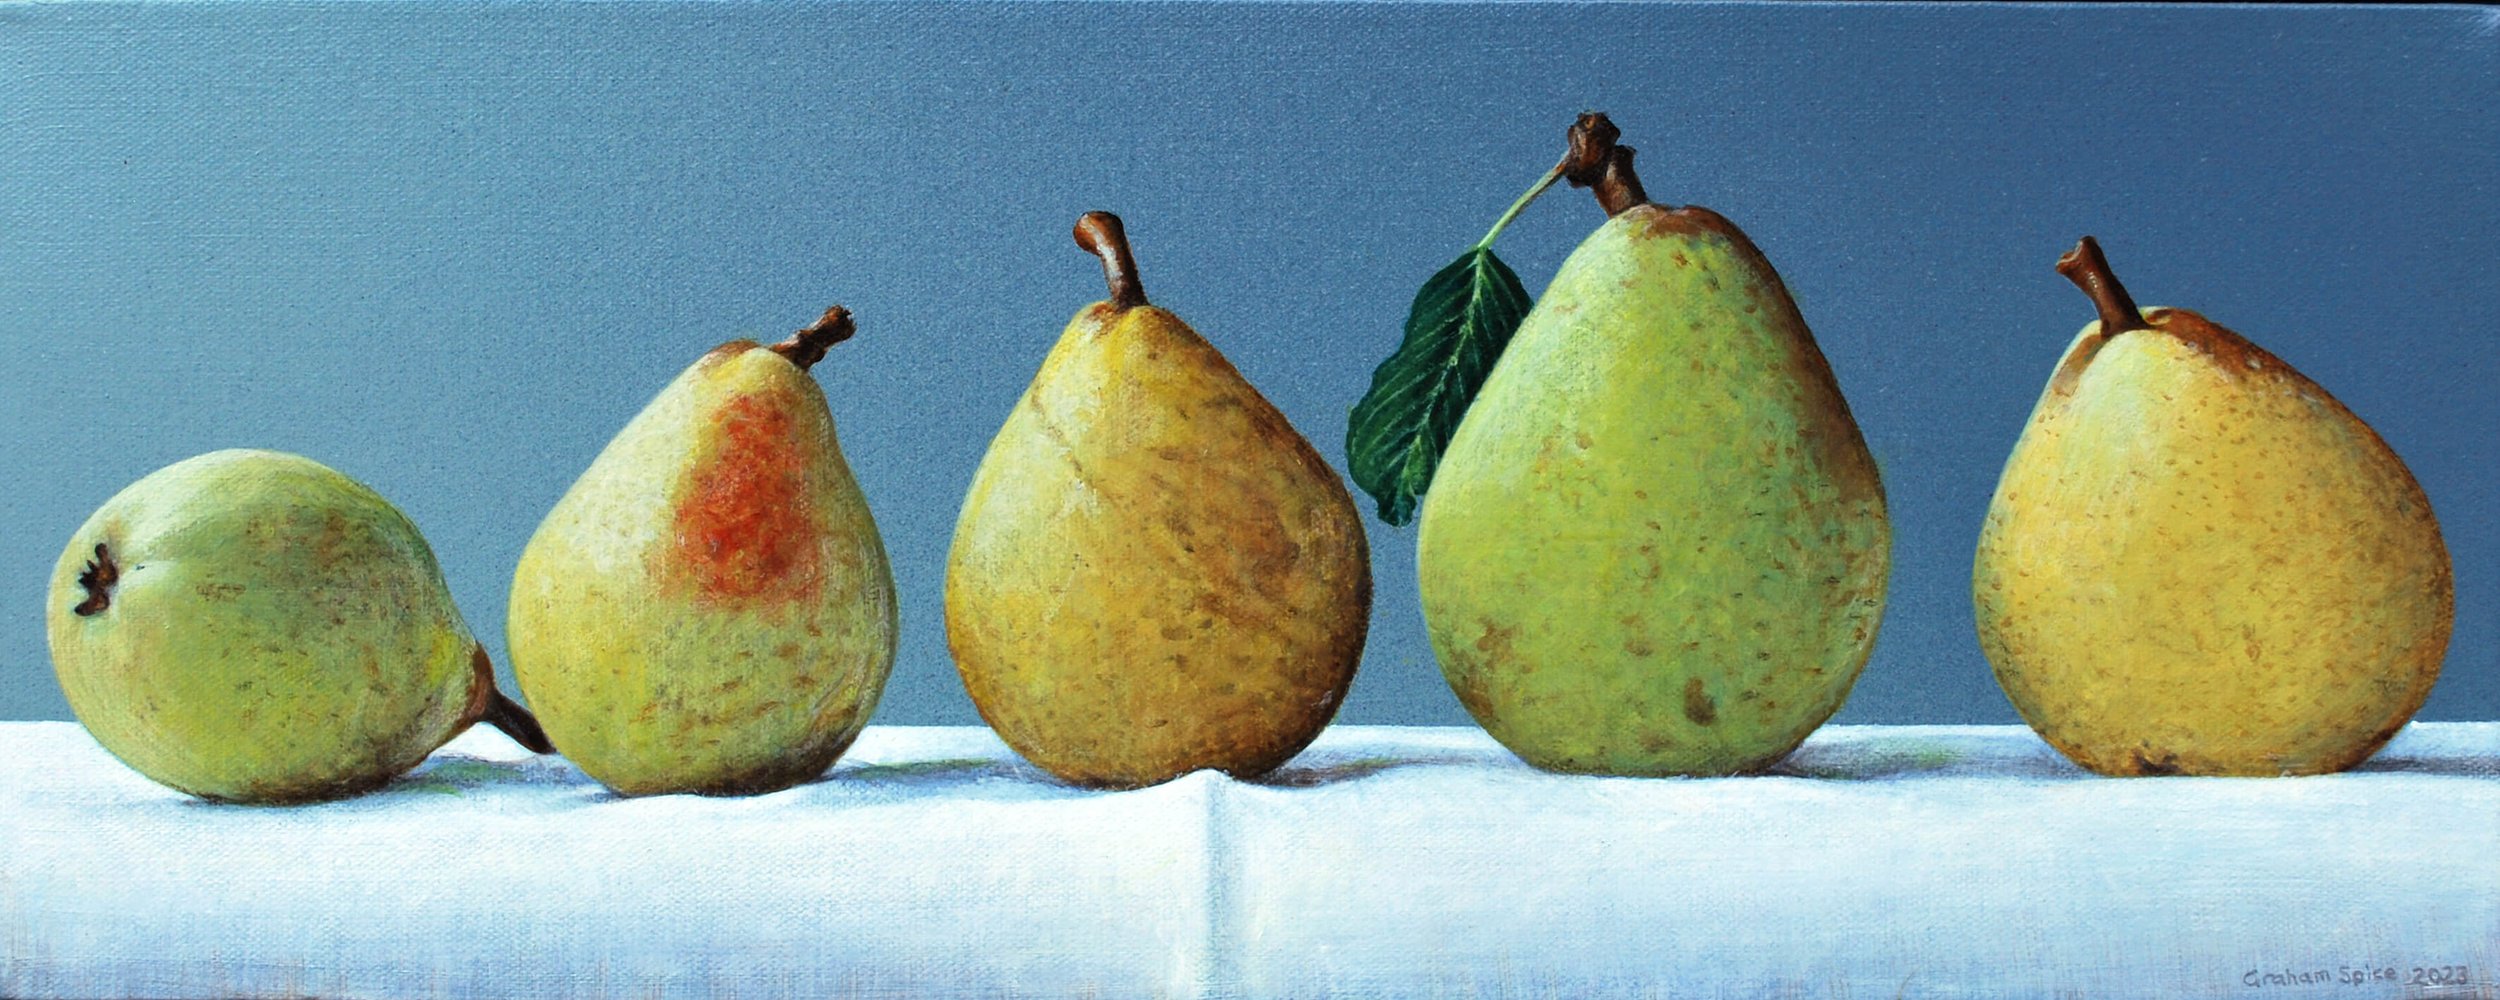 Pears-From-The-Allotment.jpg